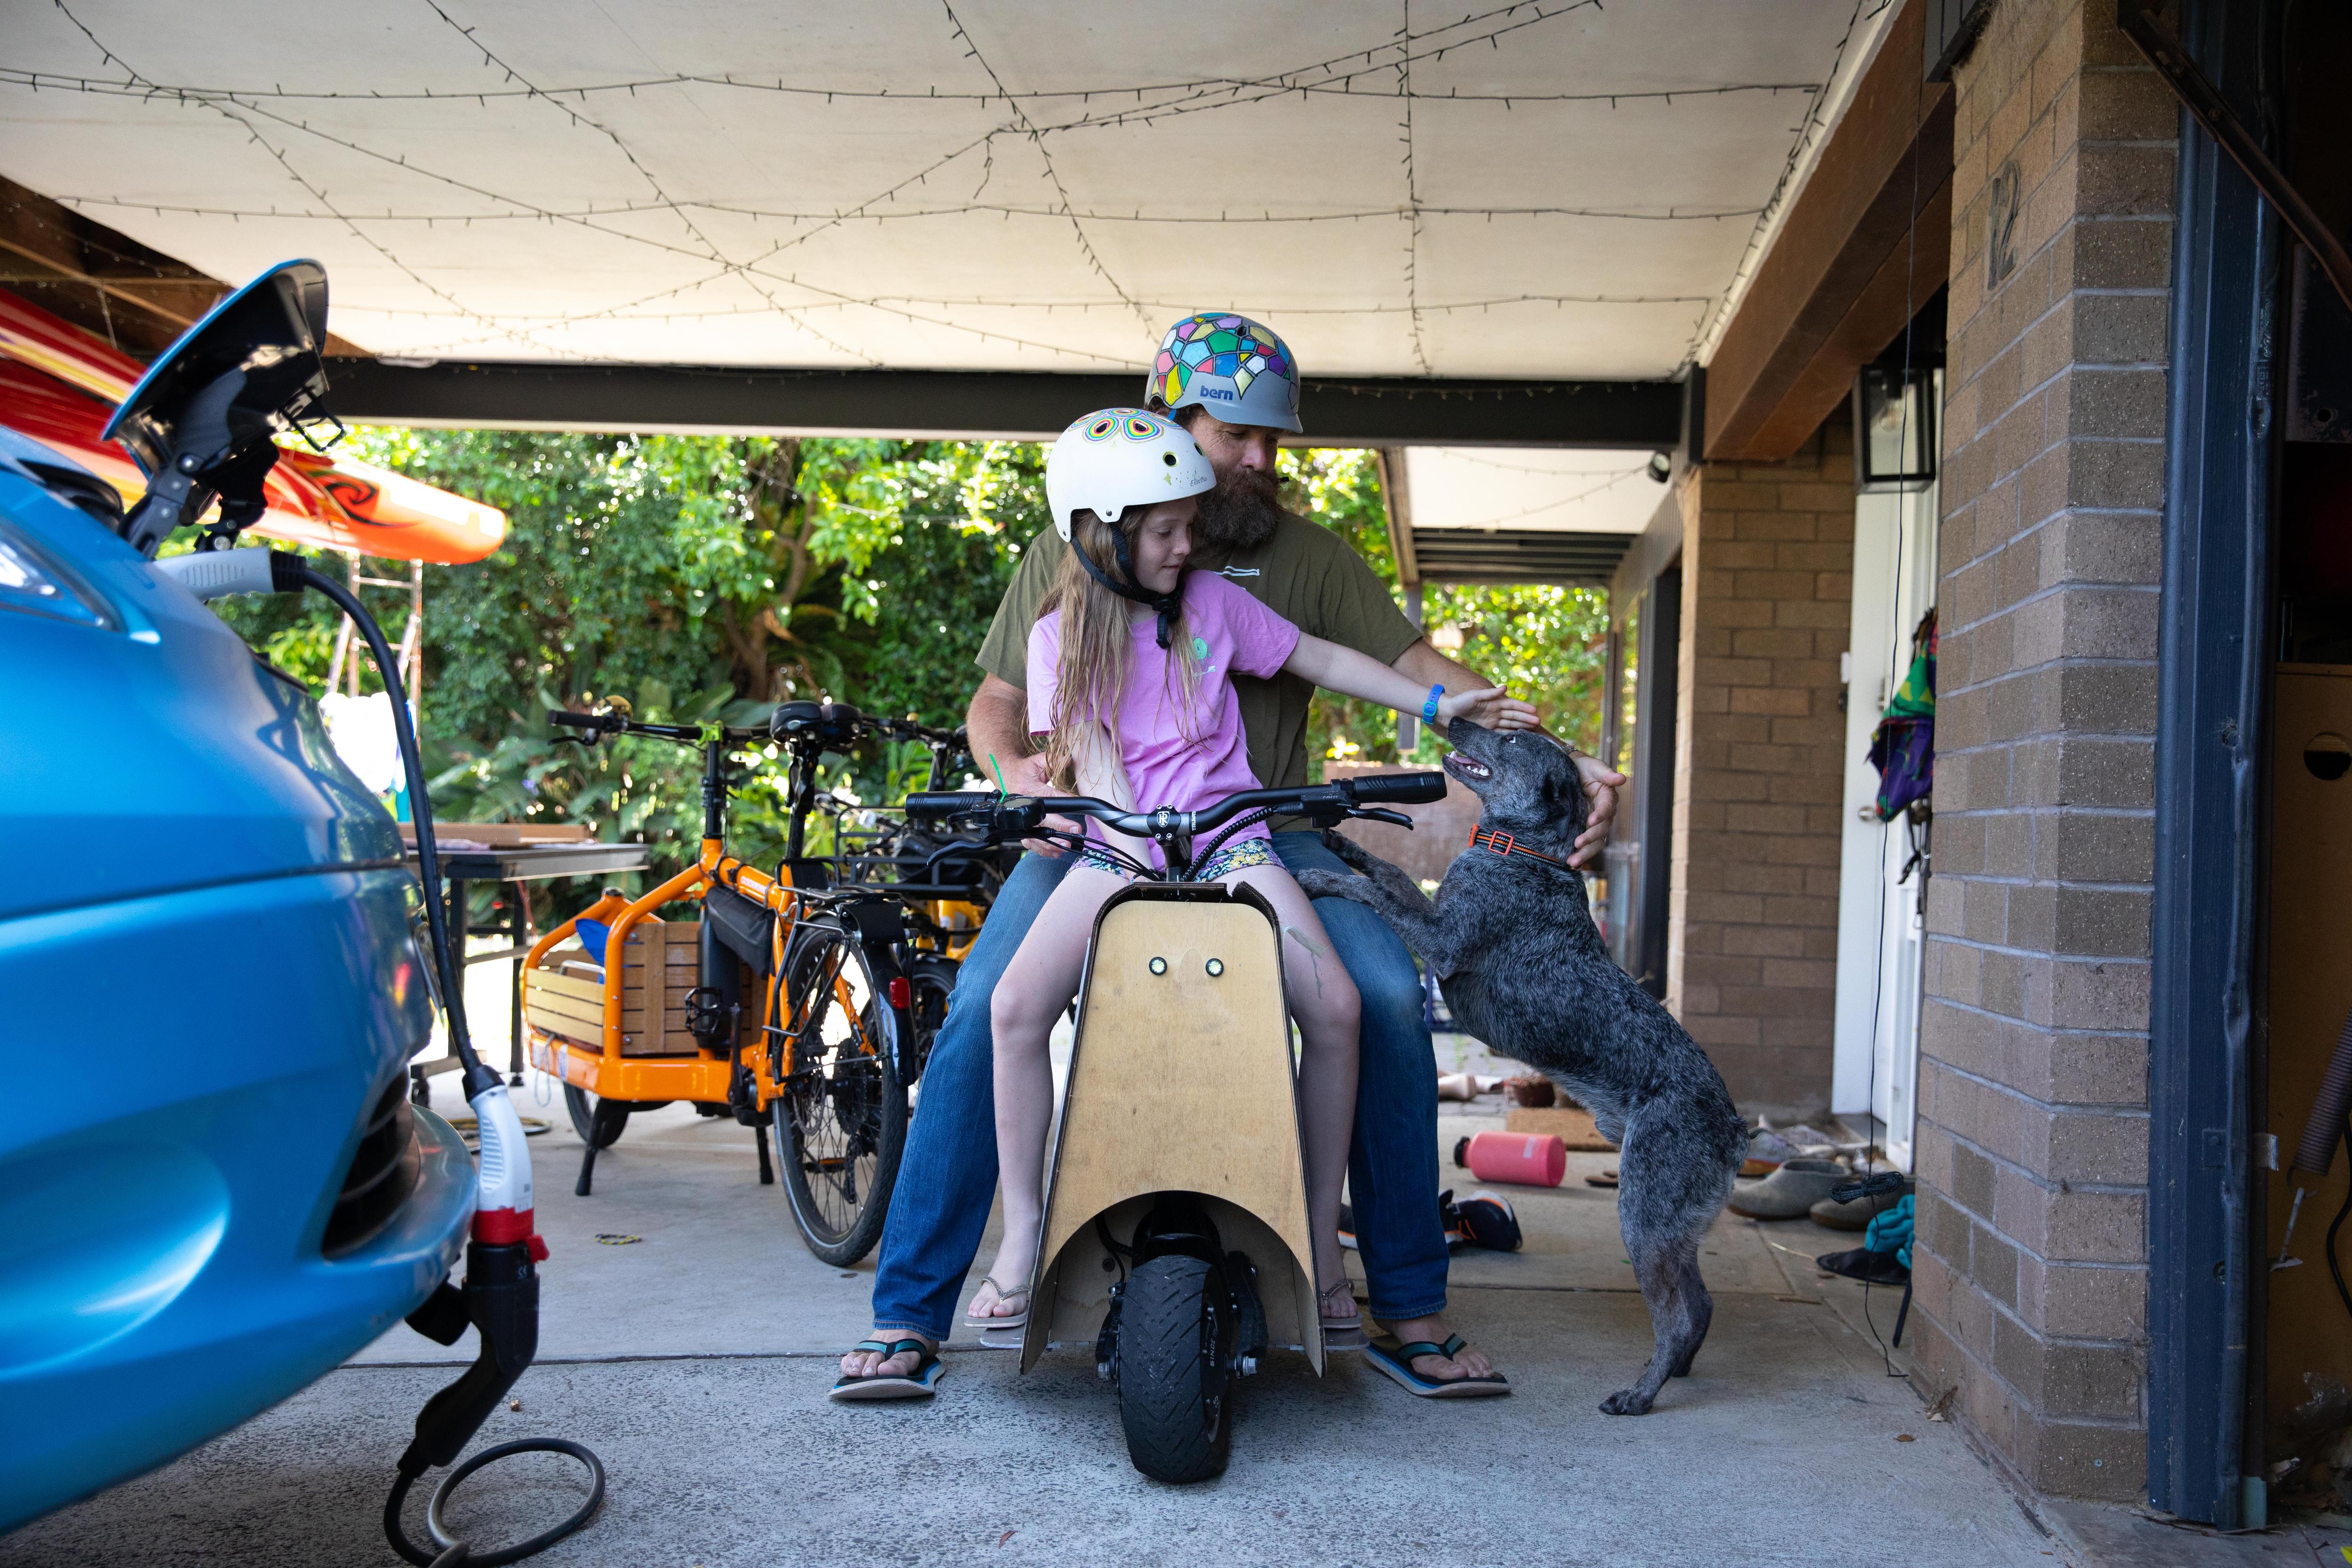 A man and a young girl wearing crash helmets sit on a scooter with wooden bodywork.